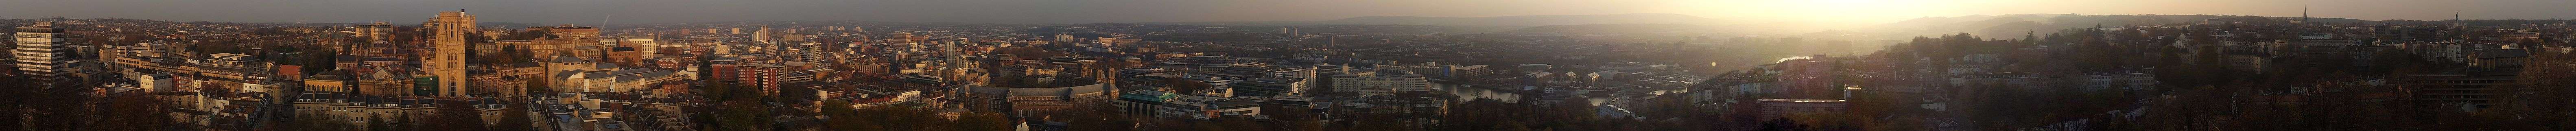 A photographic panorama of Bristol taken from the top of the Cabot Tower. The picture shows an urban environment with densely packed offices and older buildings. Hills can be seen in the distance.